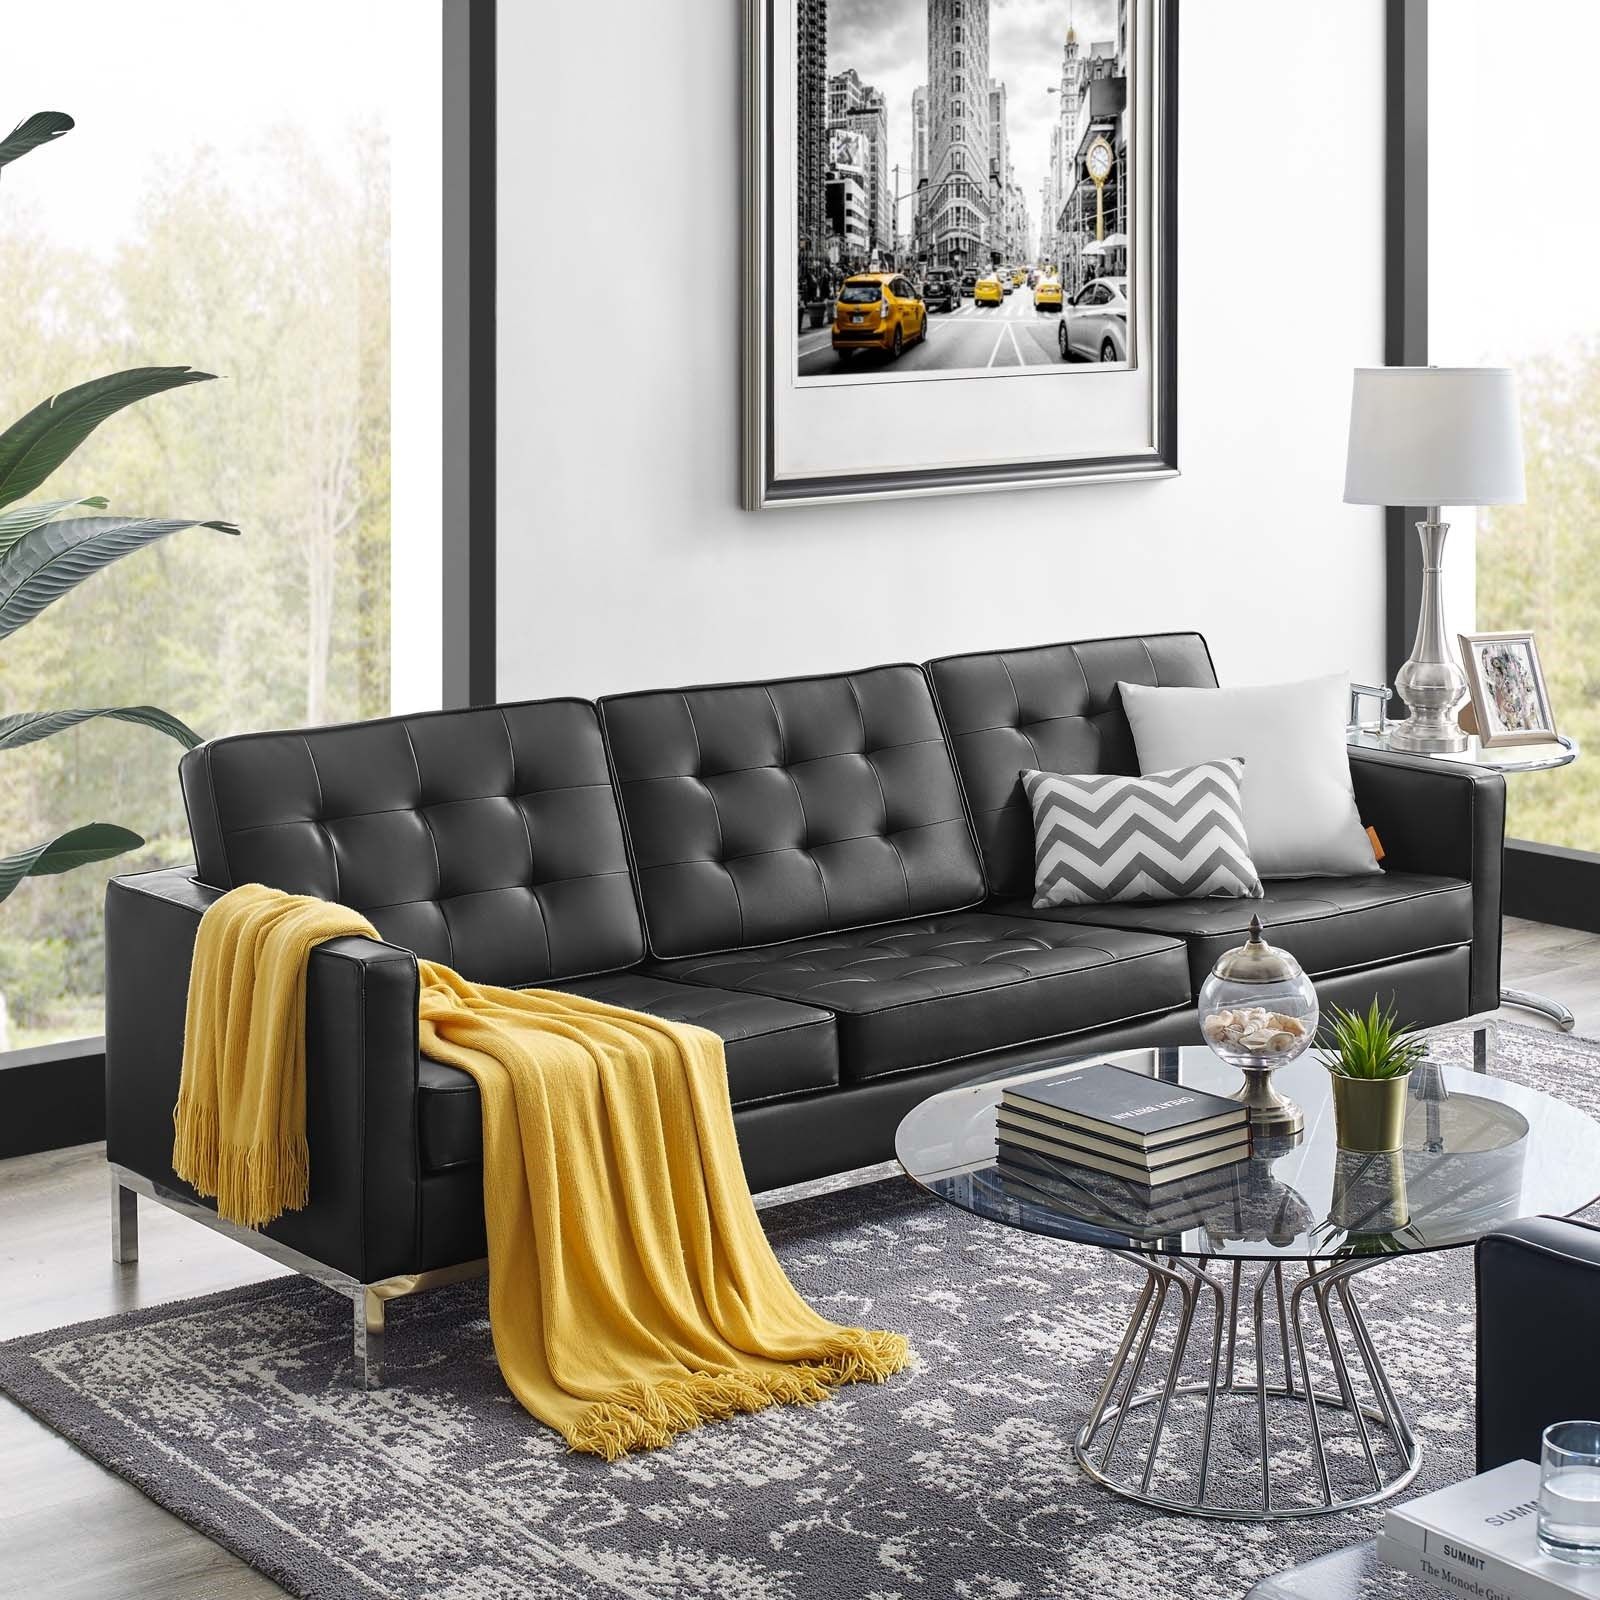 Loft Tufted Upholstered Faux Leather Sofa In Silver Black – Hyme Furniture Within Faux Leather Sofas (View 10 of 21)